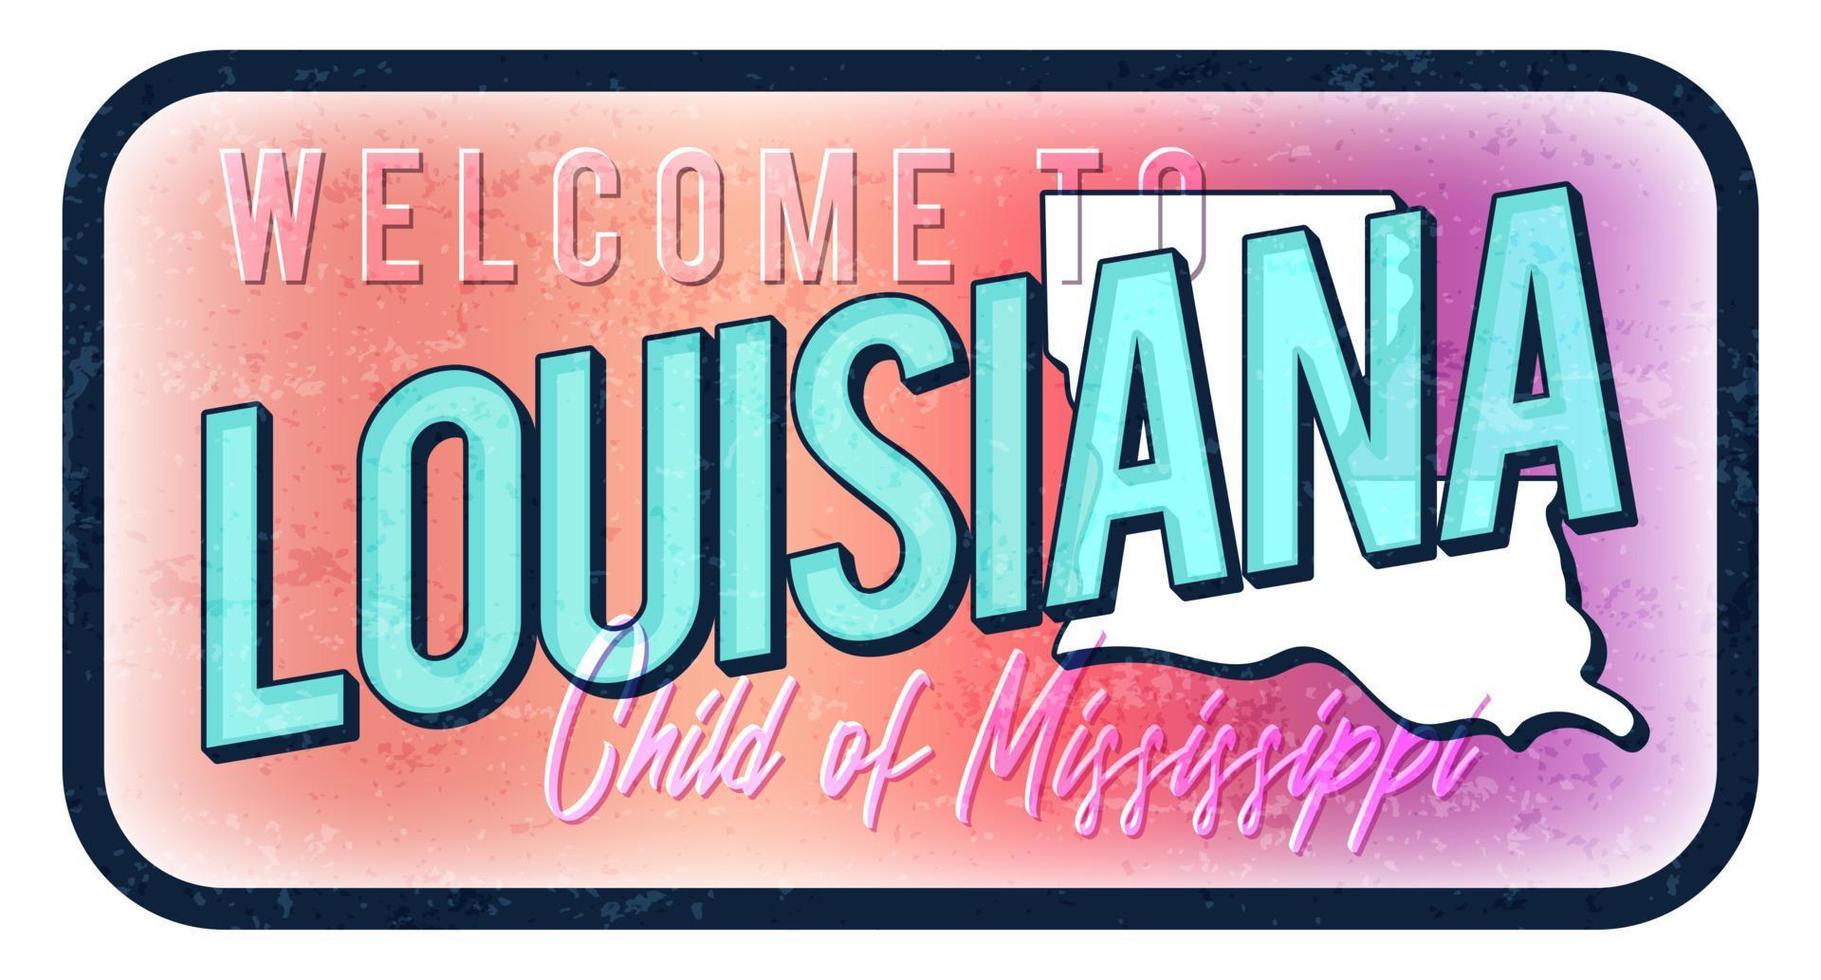 Welcome to Louisiana vintage rusty metal sign vector illustration. Vector state map in grunge style with Typography hand drawn lettering